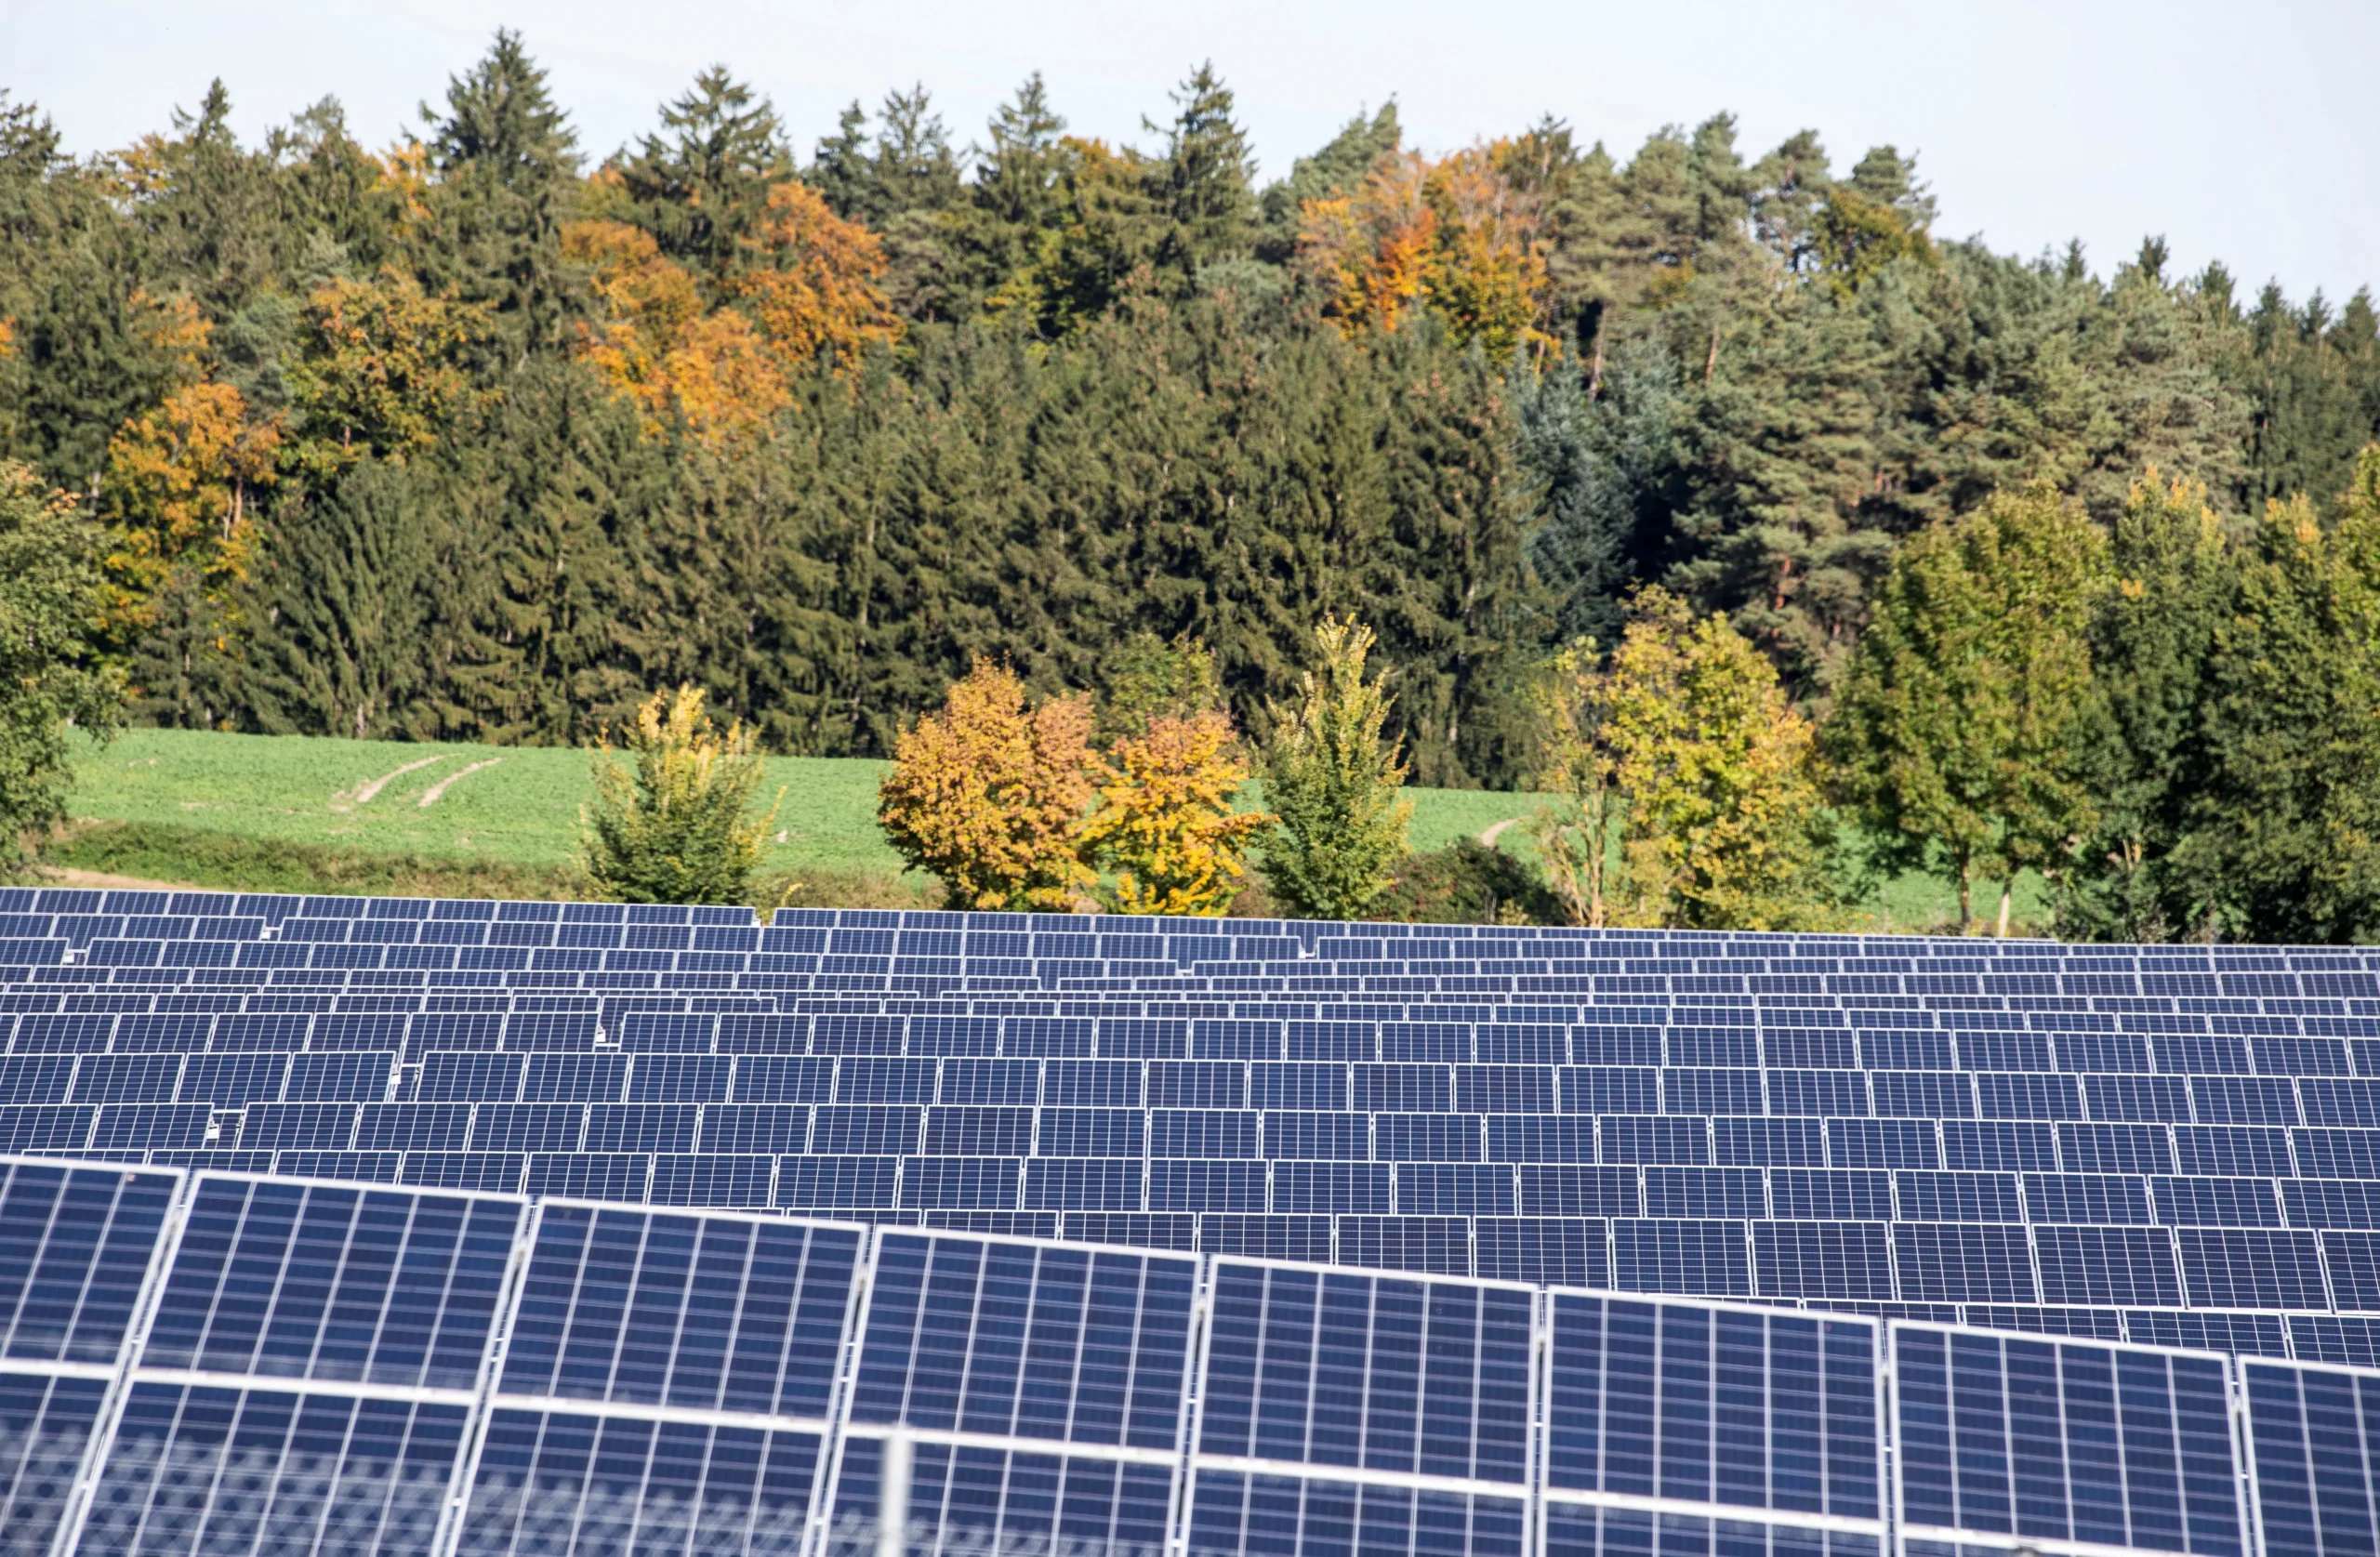 germany problem with solar energy - Why is Germany having an energy crisis